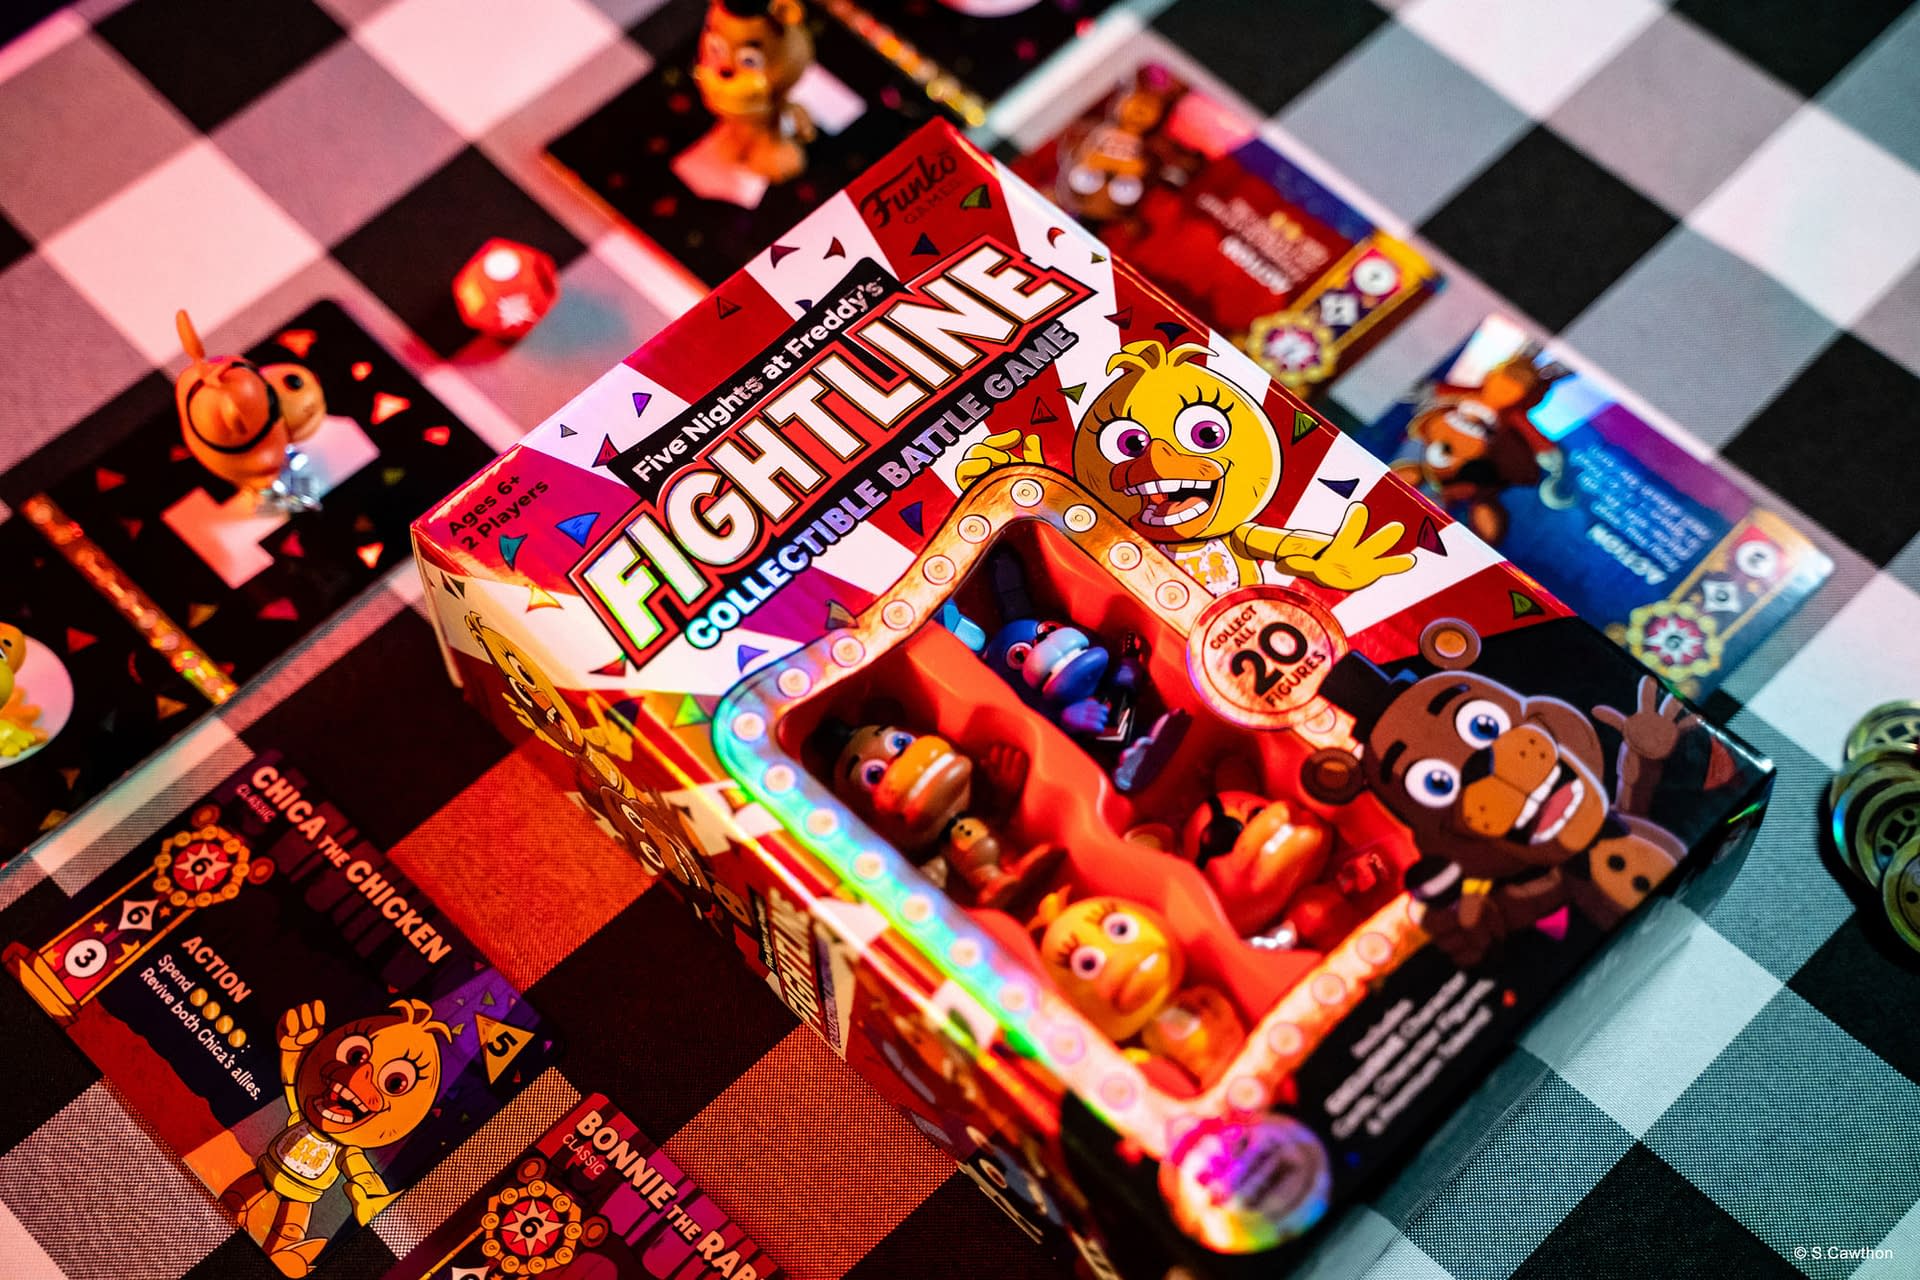 Five Nights At Freddy's Is The Rare Day-And-Date Release That